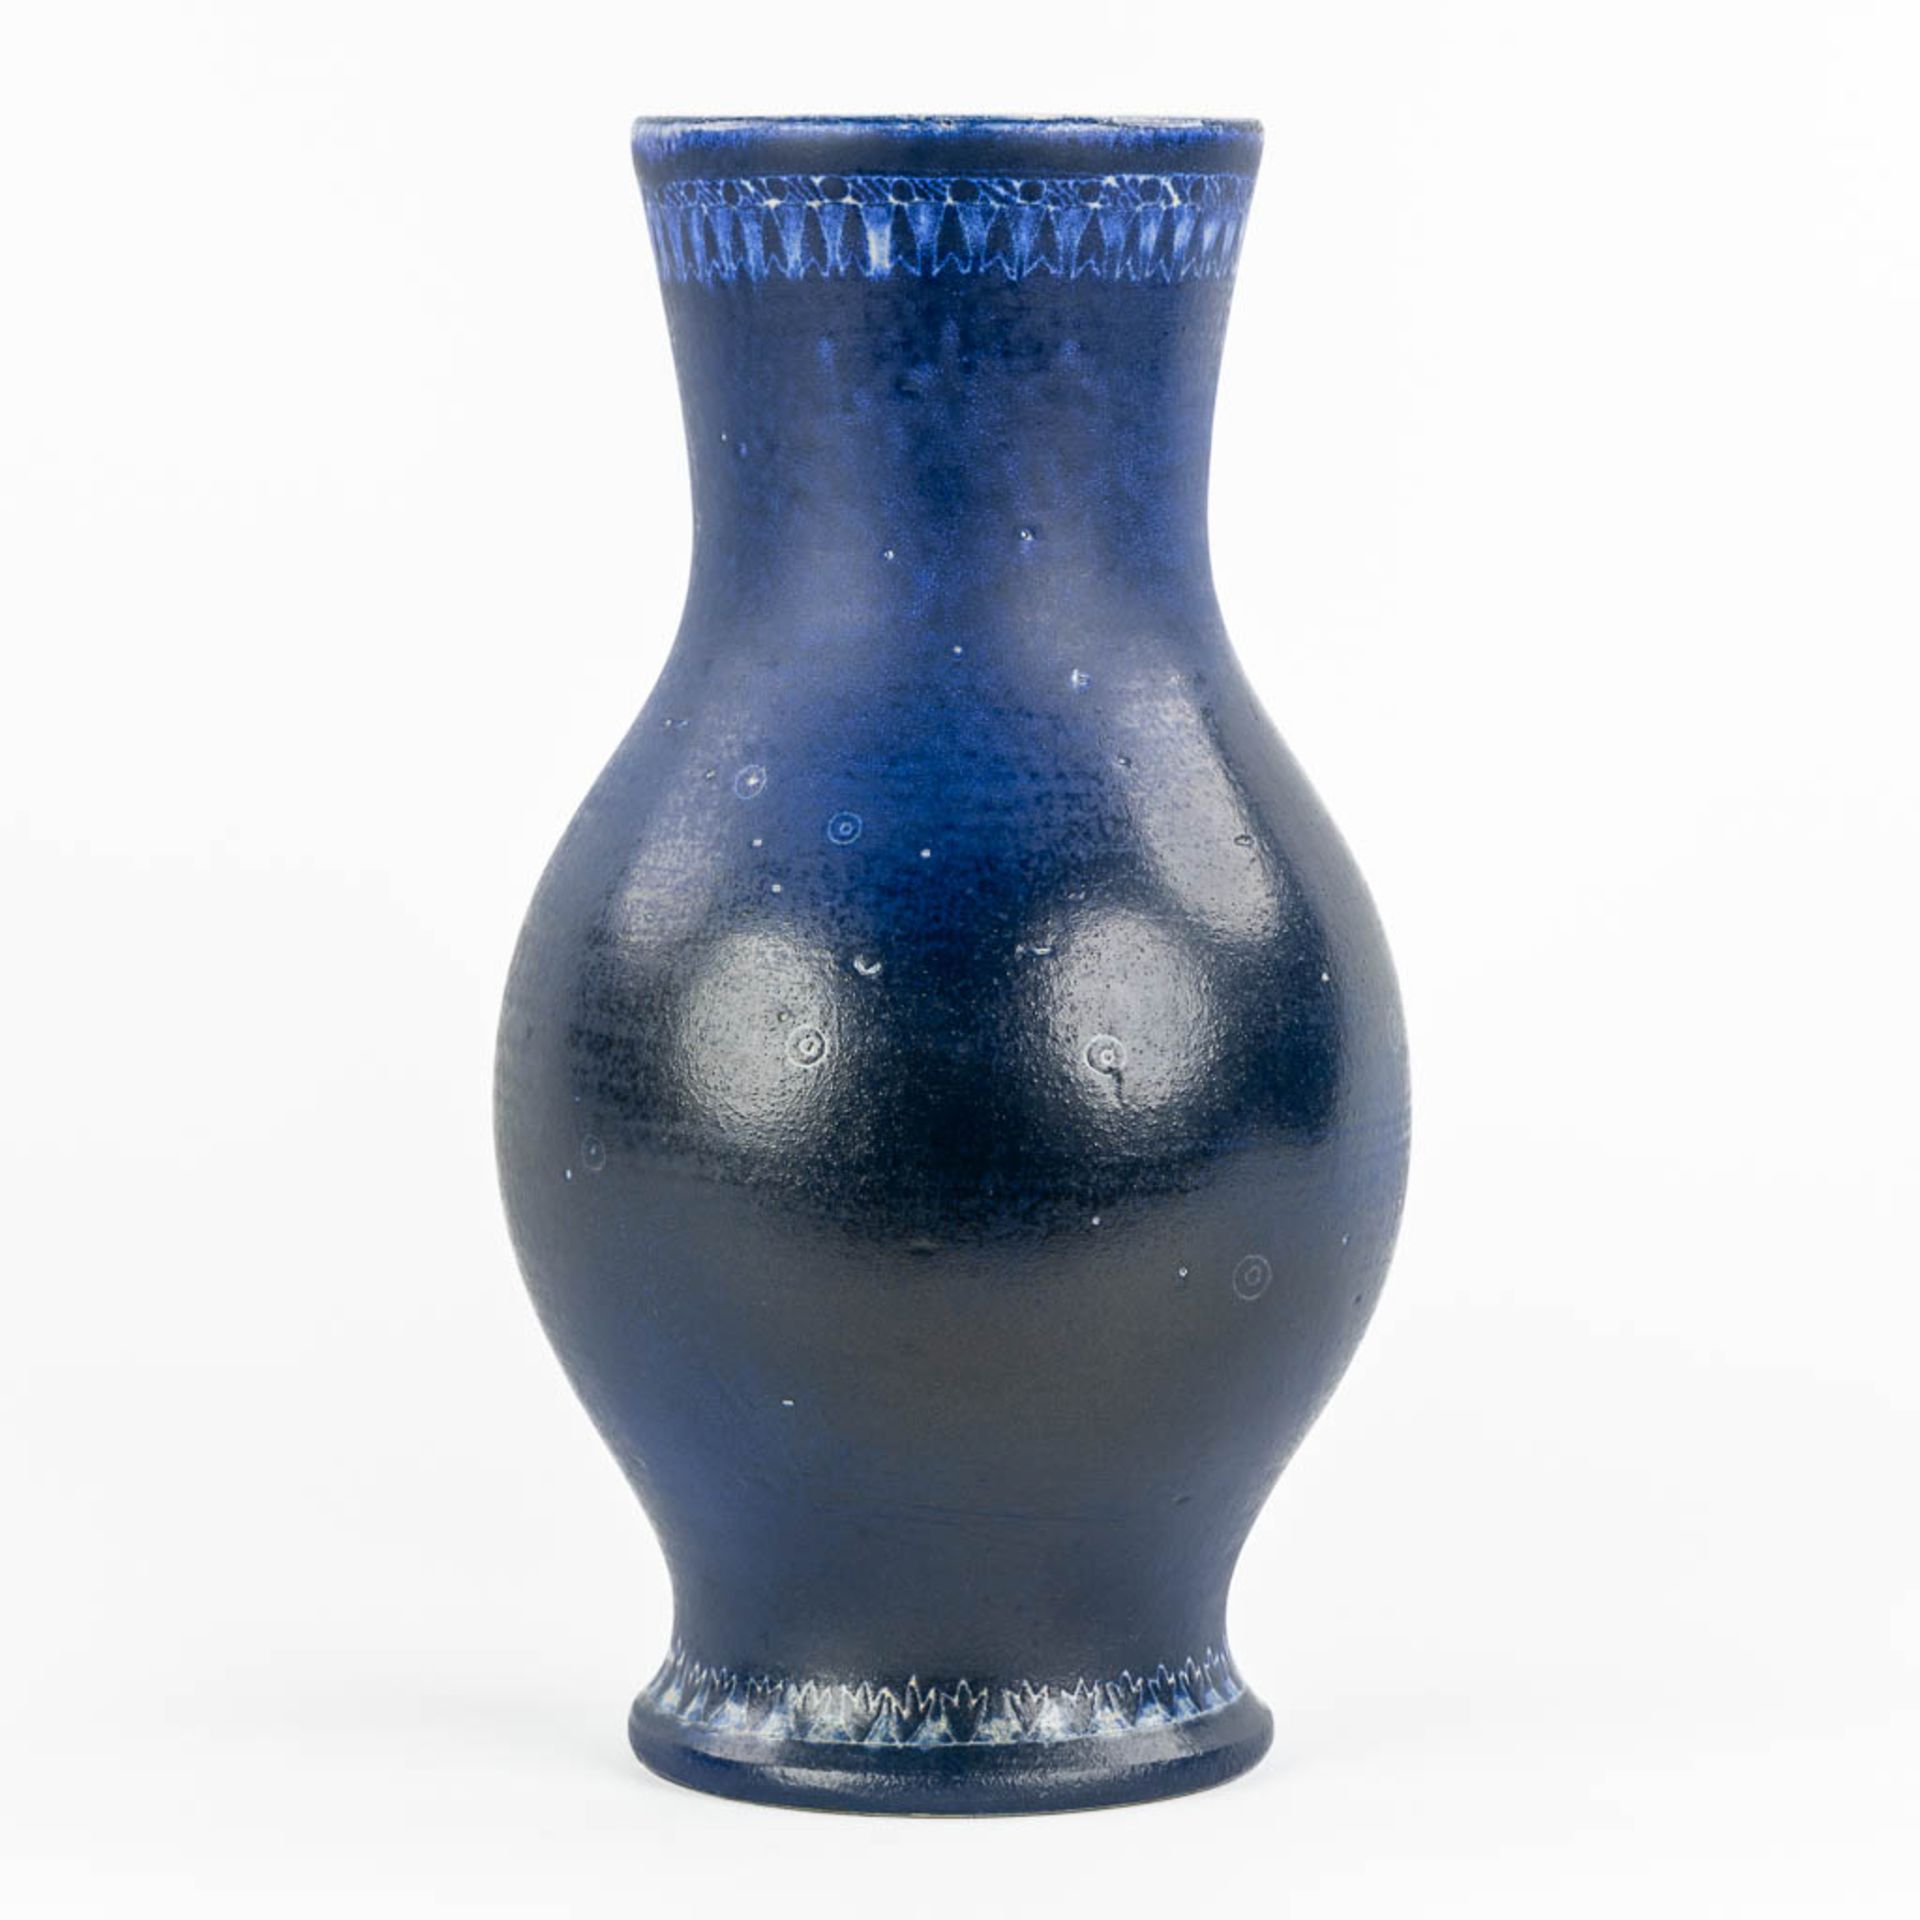 A vase with blue glaze, glazed ceramics for Perignem. From the early periods. (H:31,5 x D:18 cm) - Image 3 of 11